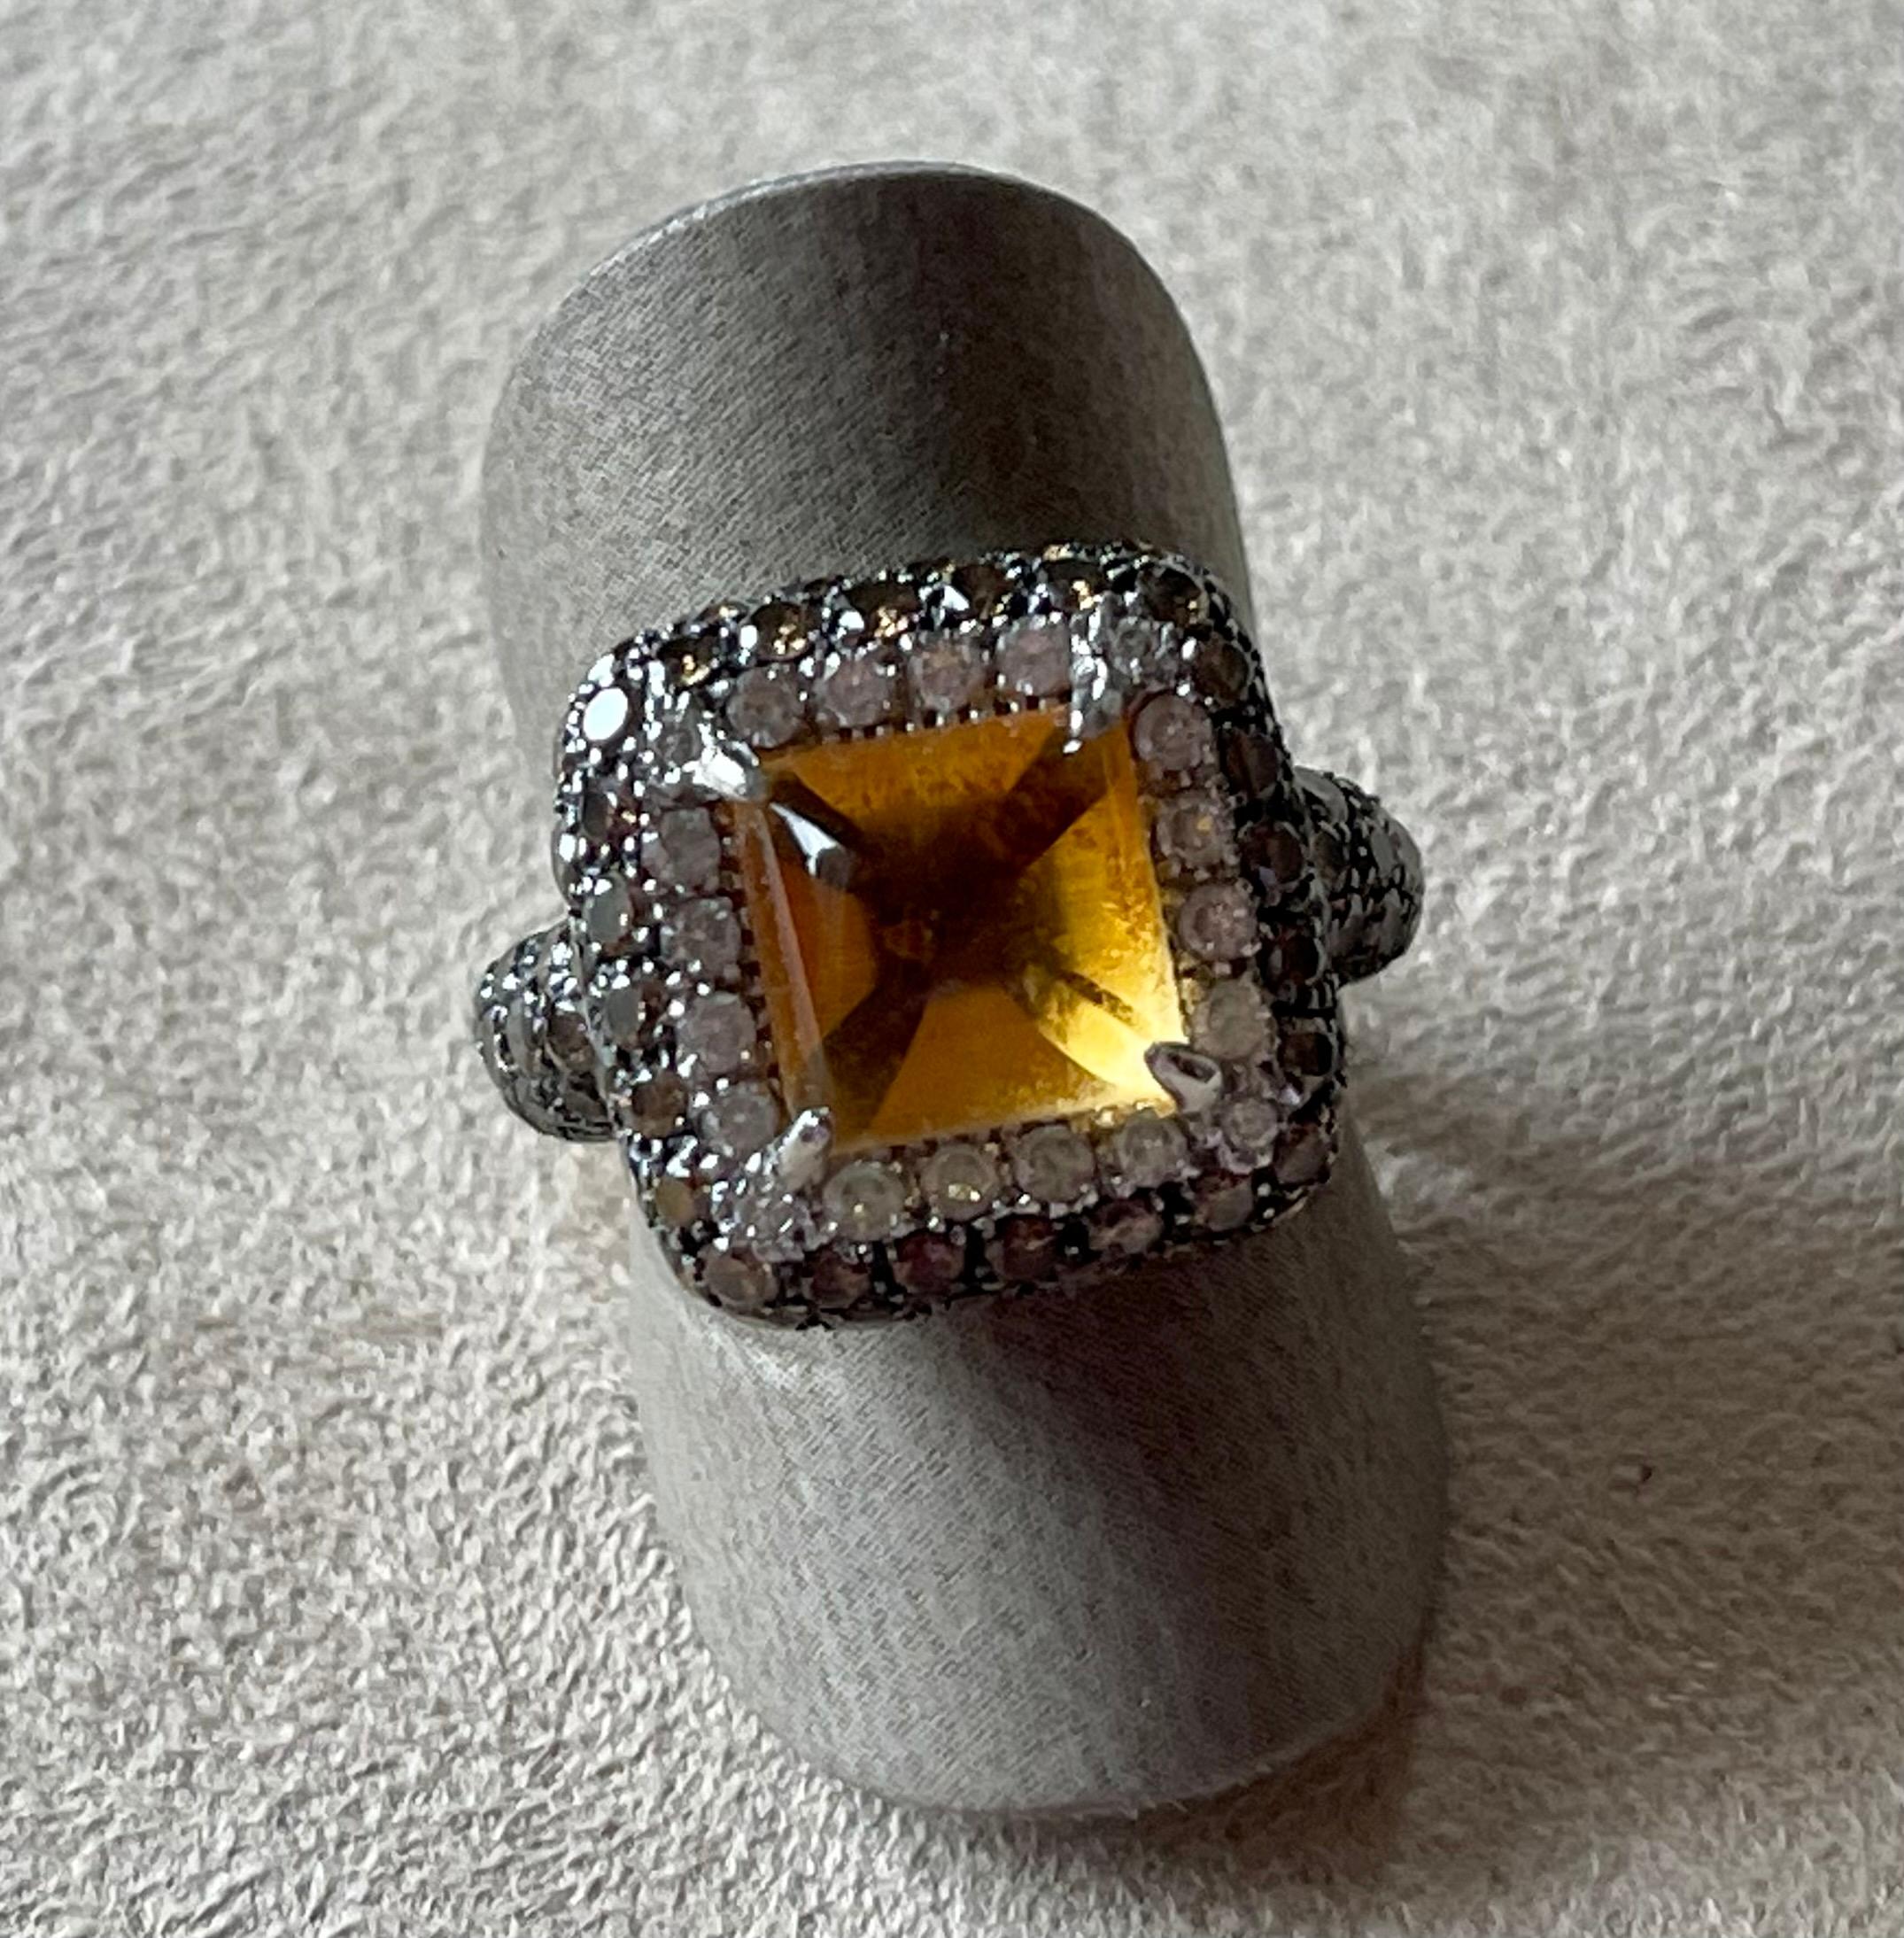 Attractive 18 K white Gold Cocktail Ring featuring a sugarloaf Citrine Cabochons weighing 3.49 ct surrounded by 20 white brilliant cut Diamonds weighing 0.40 ct and 86 Champagne colored brilliant cut Diamonds with a total weight of 2.21